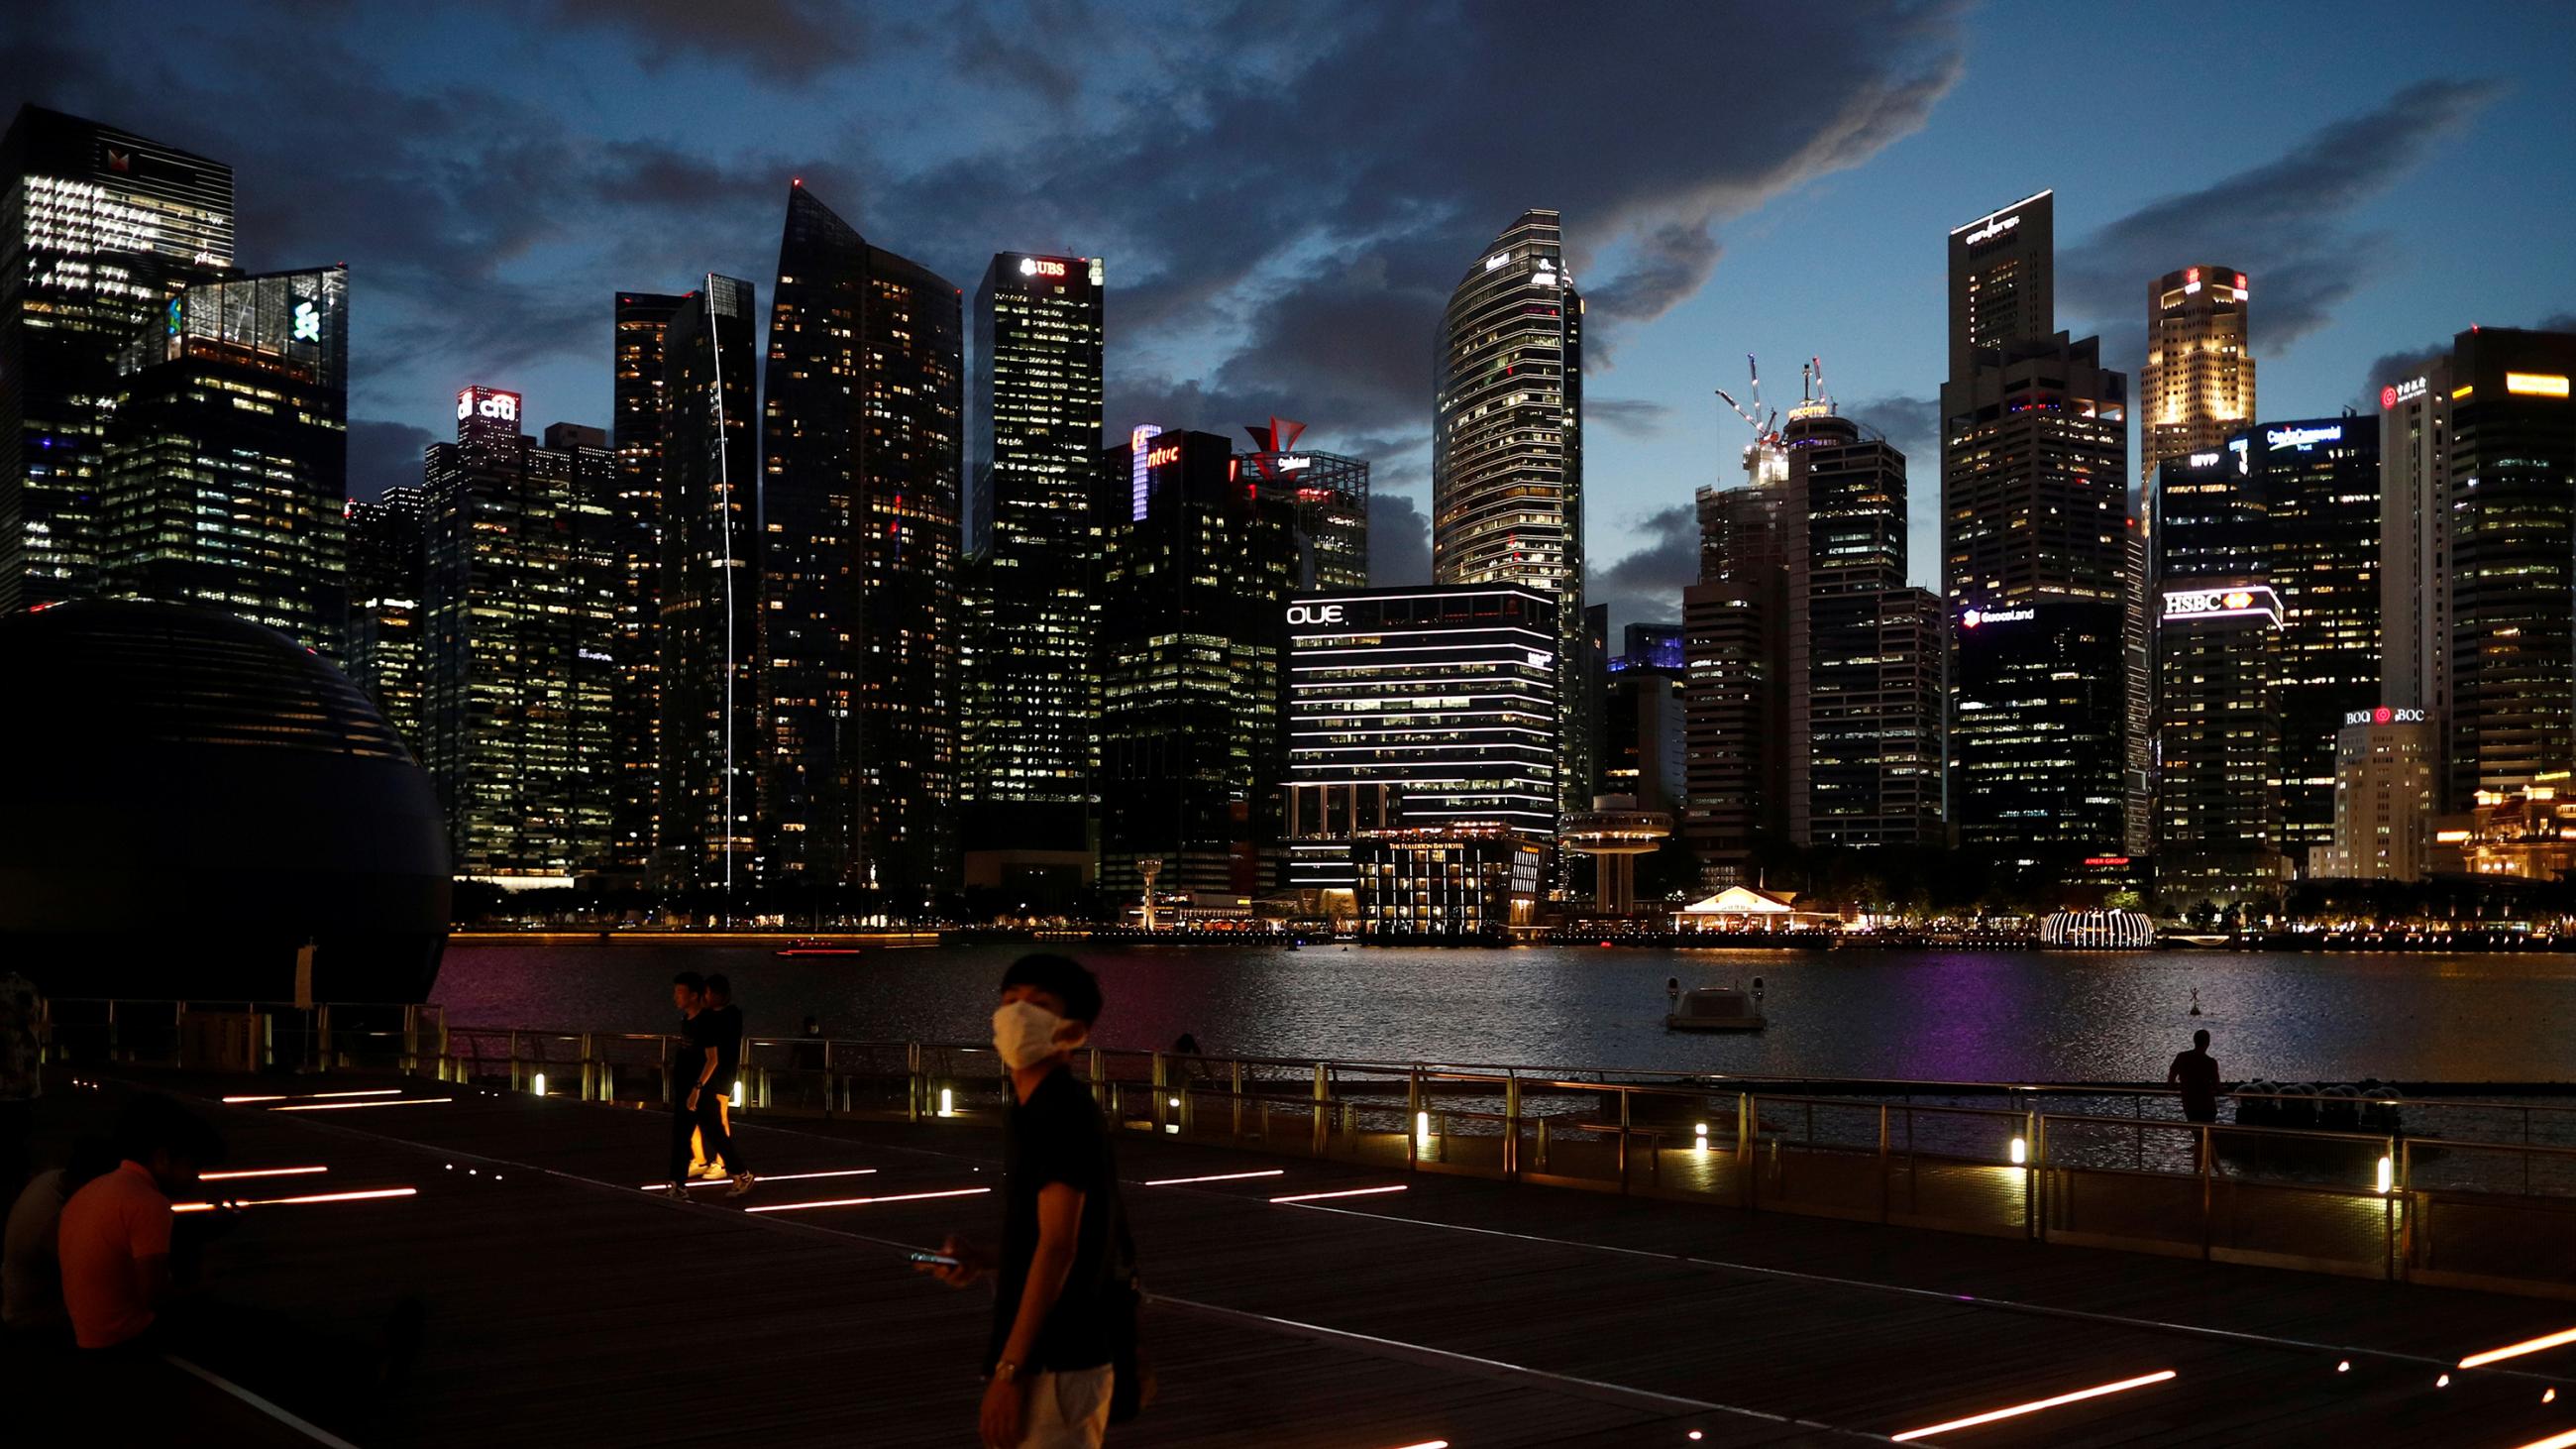 This is a stunning photo showing the Singapore skyline at dusk from across the water. 